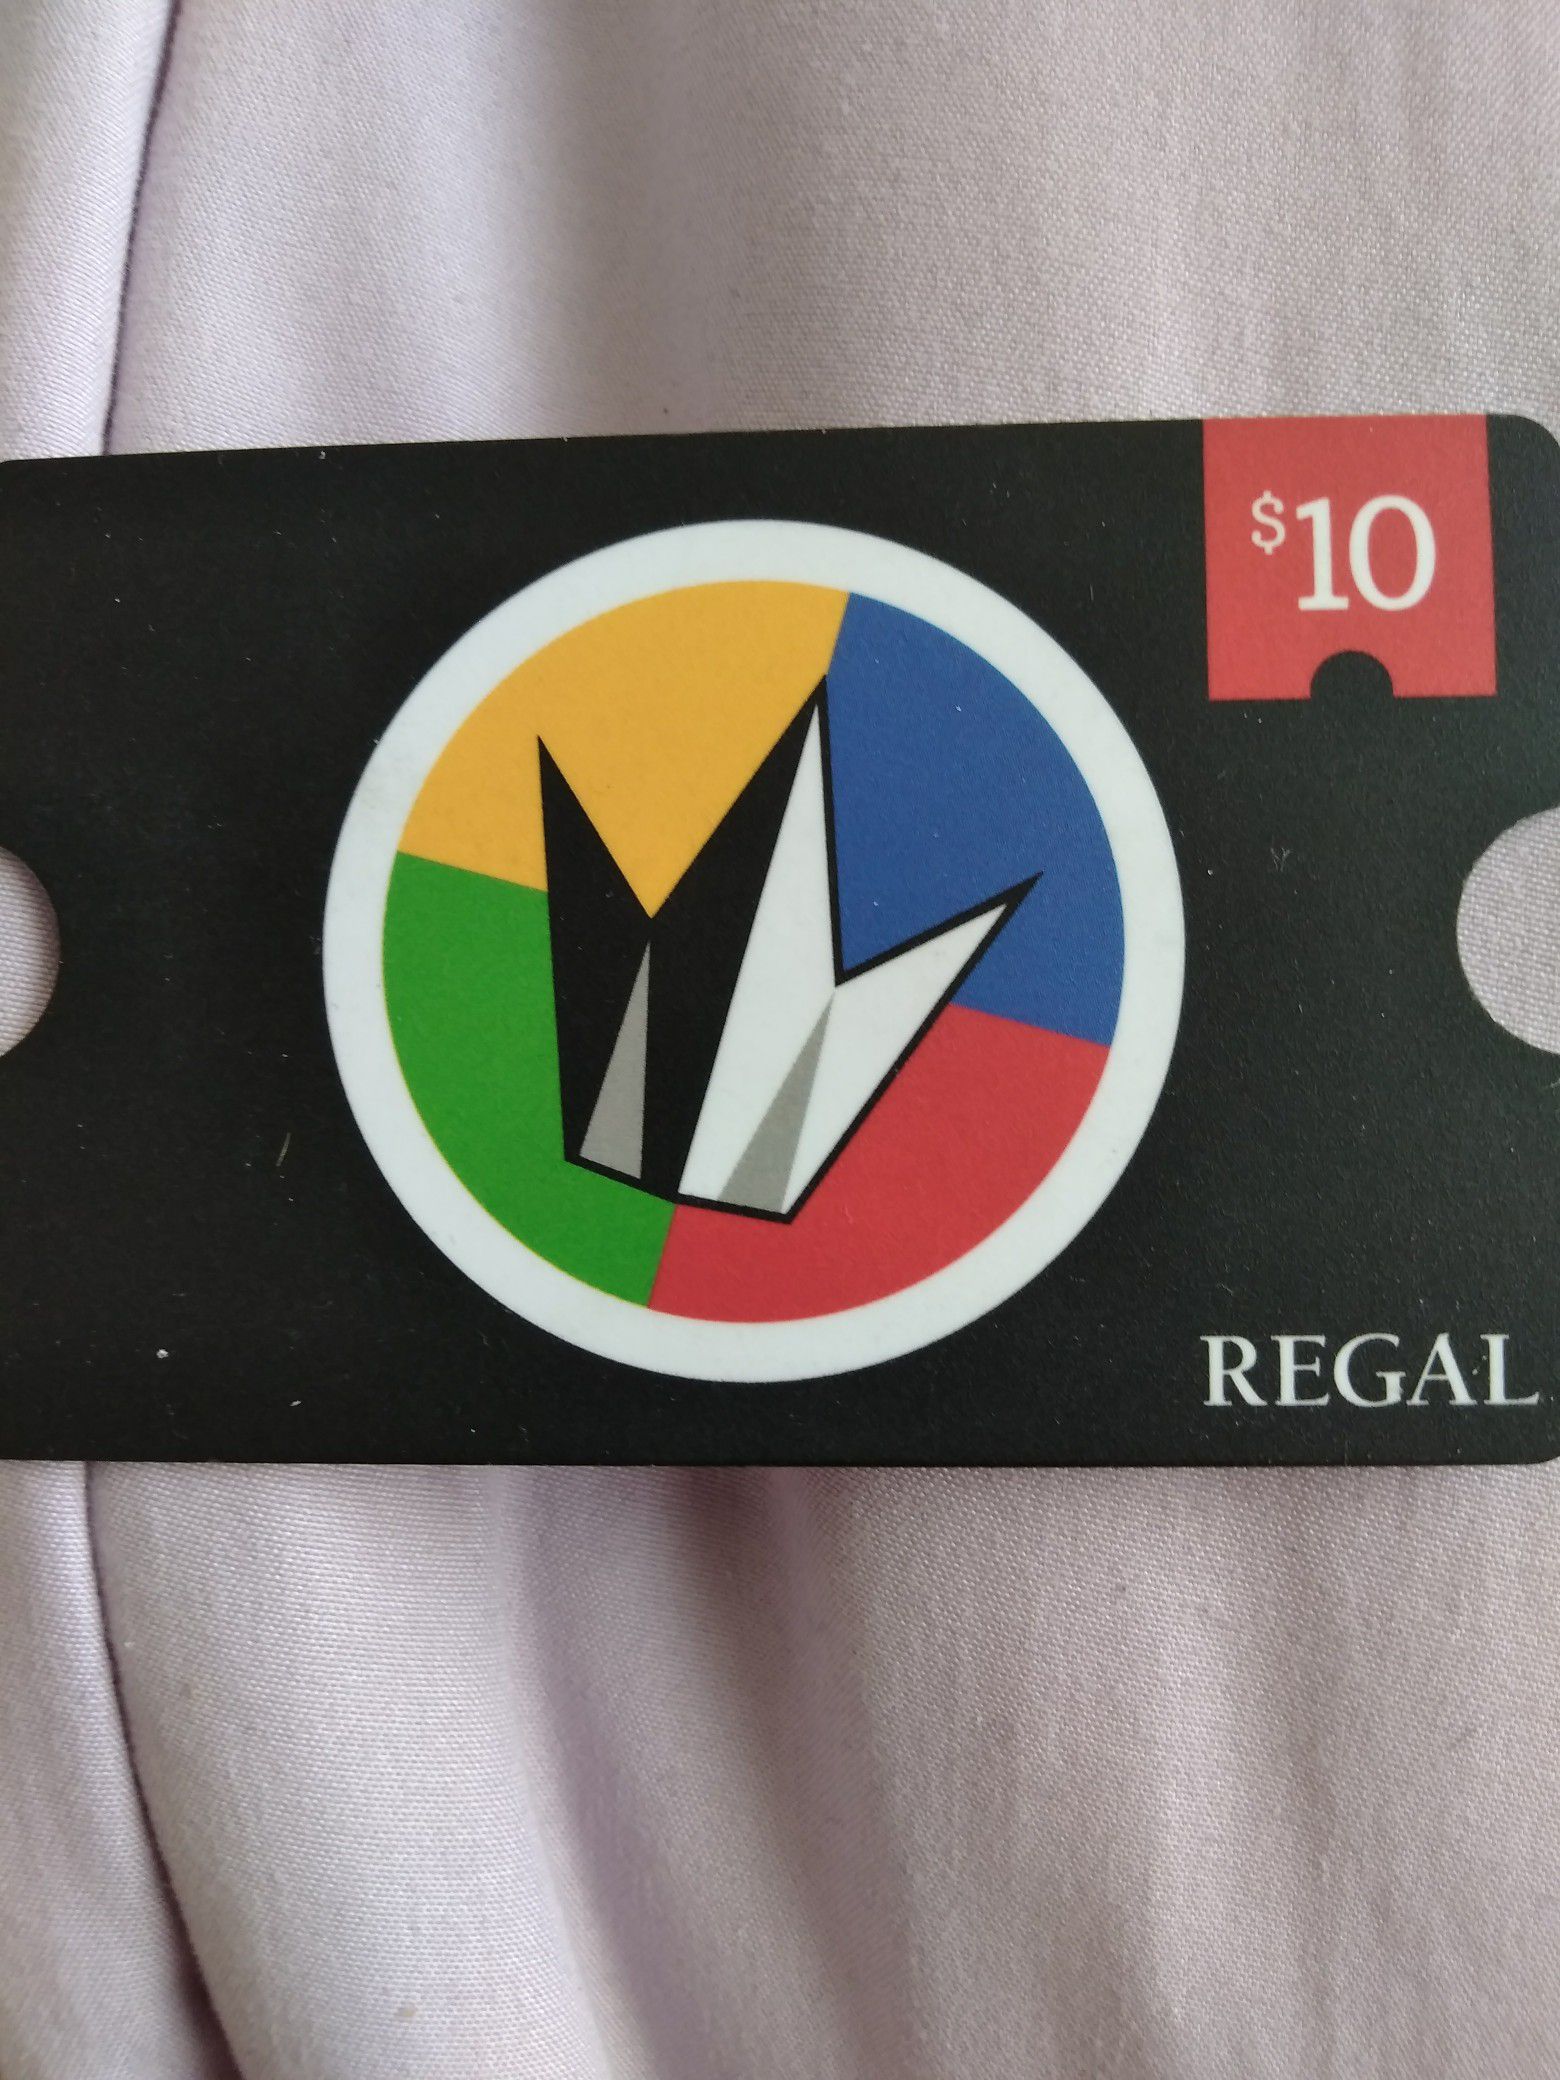 Free Regal Card to Any One that buys more than one item from me*